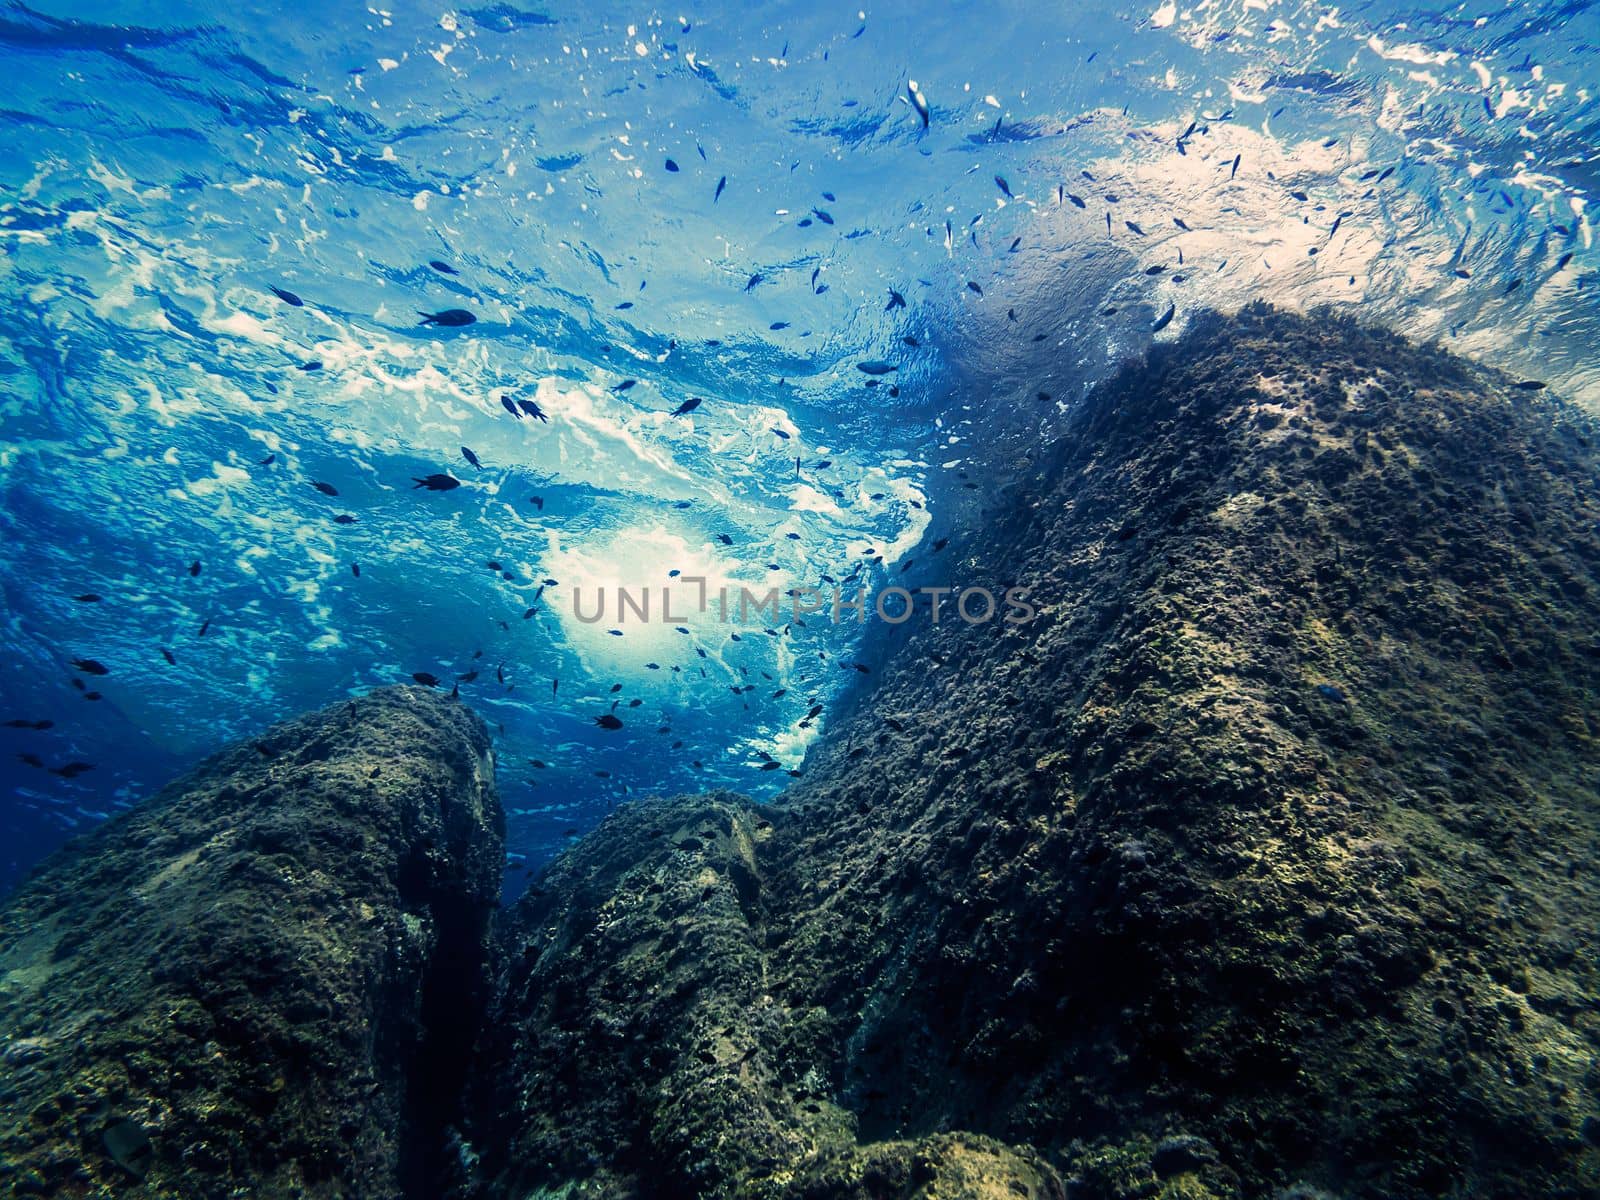 waves beating against the rocks, underwater view by raulmelldo